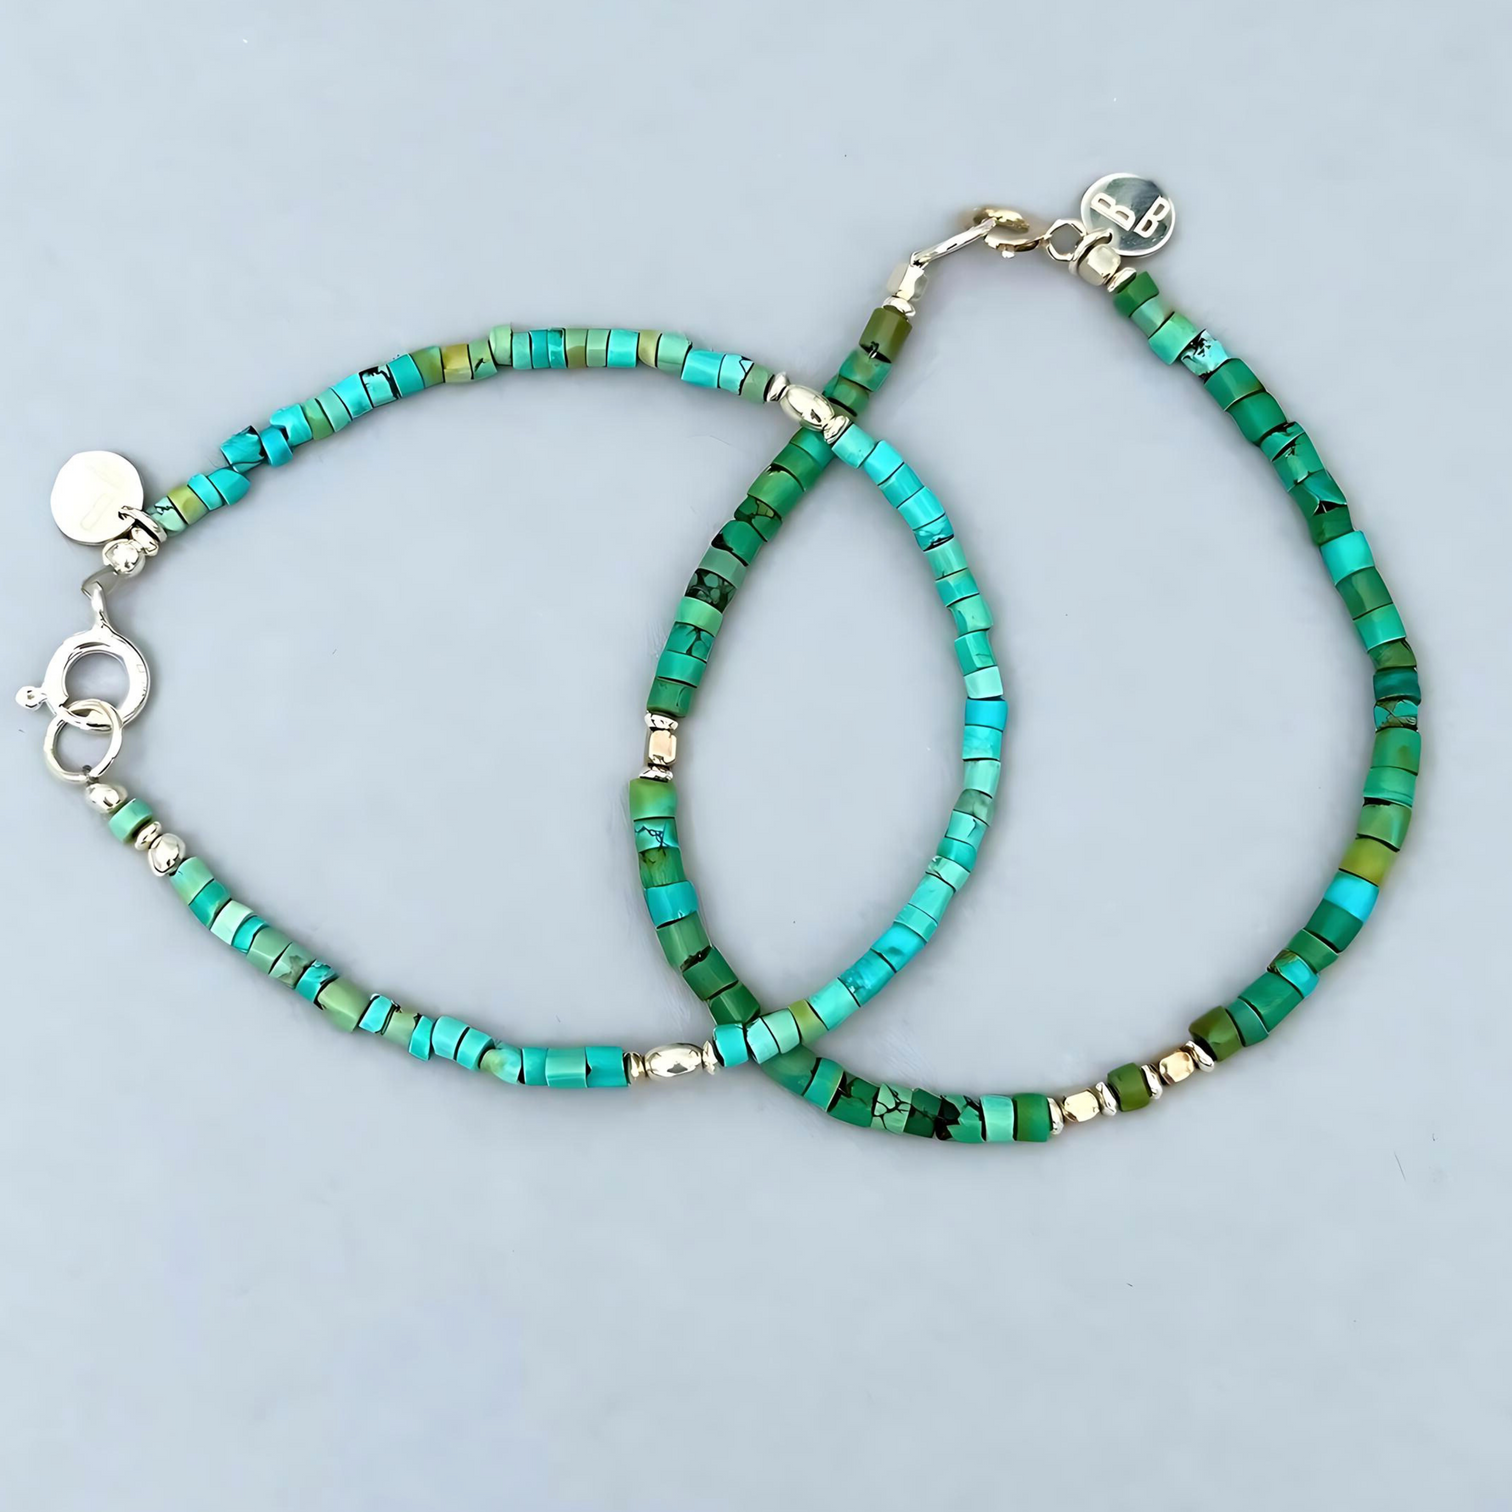 Le BijouBijou Men's Bracelet Surfer's Paradise made with Turquoise and Sterling Silver.